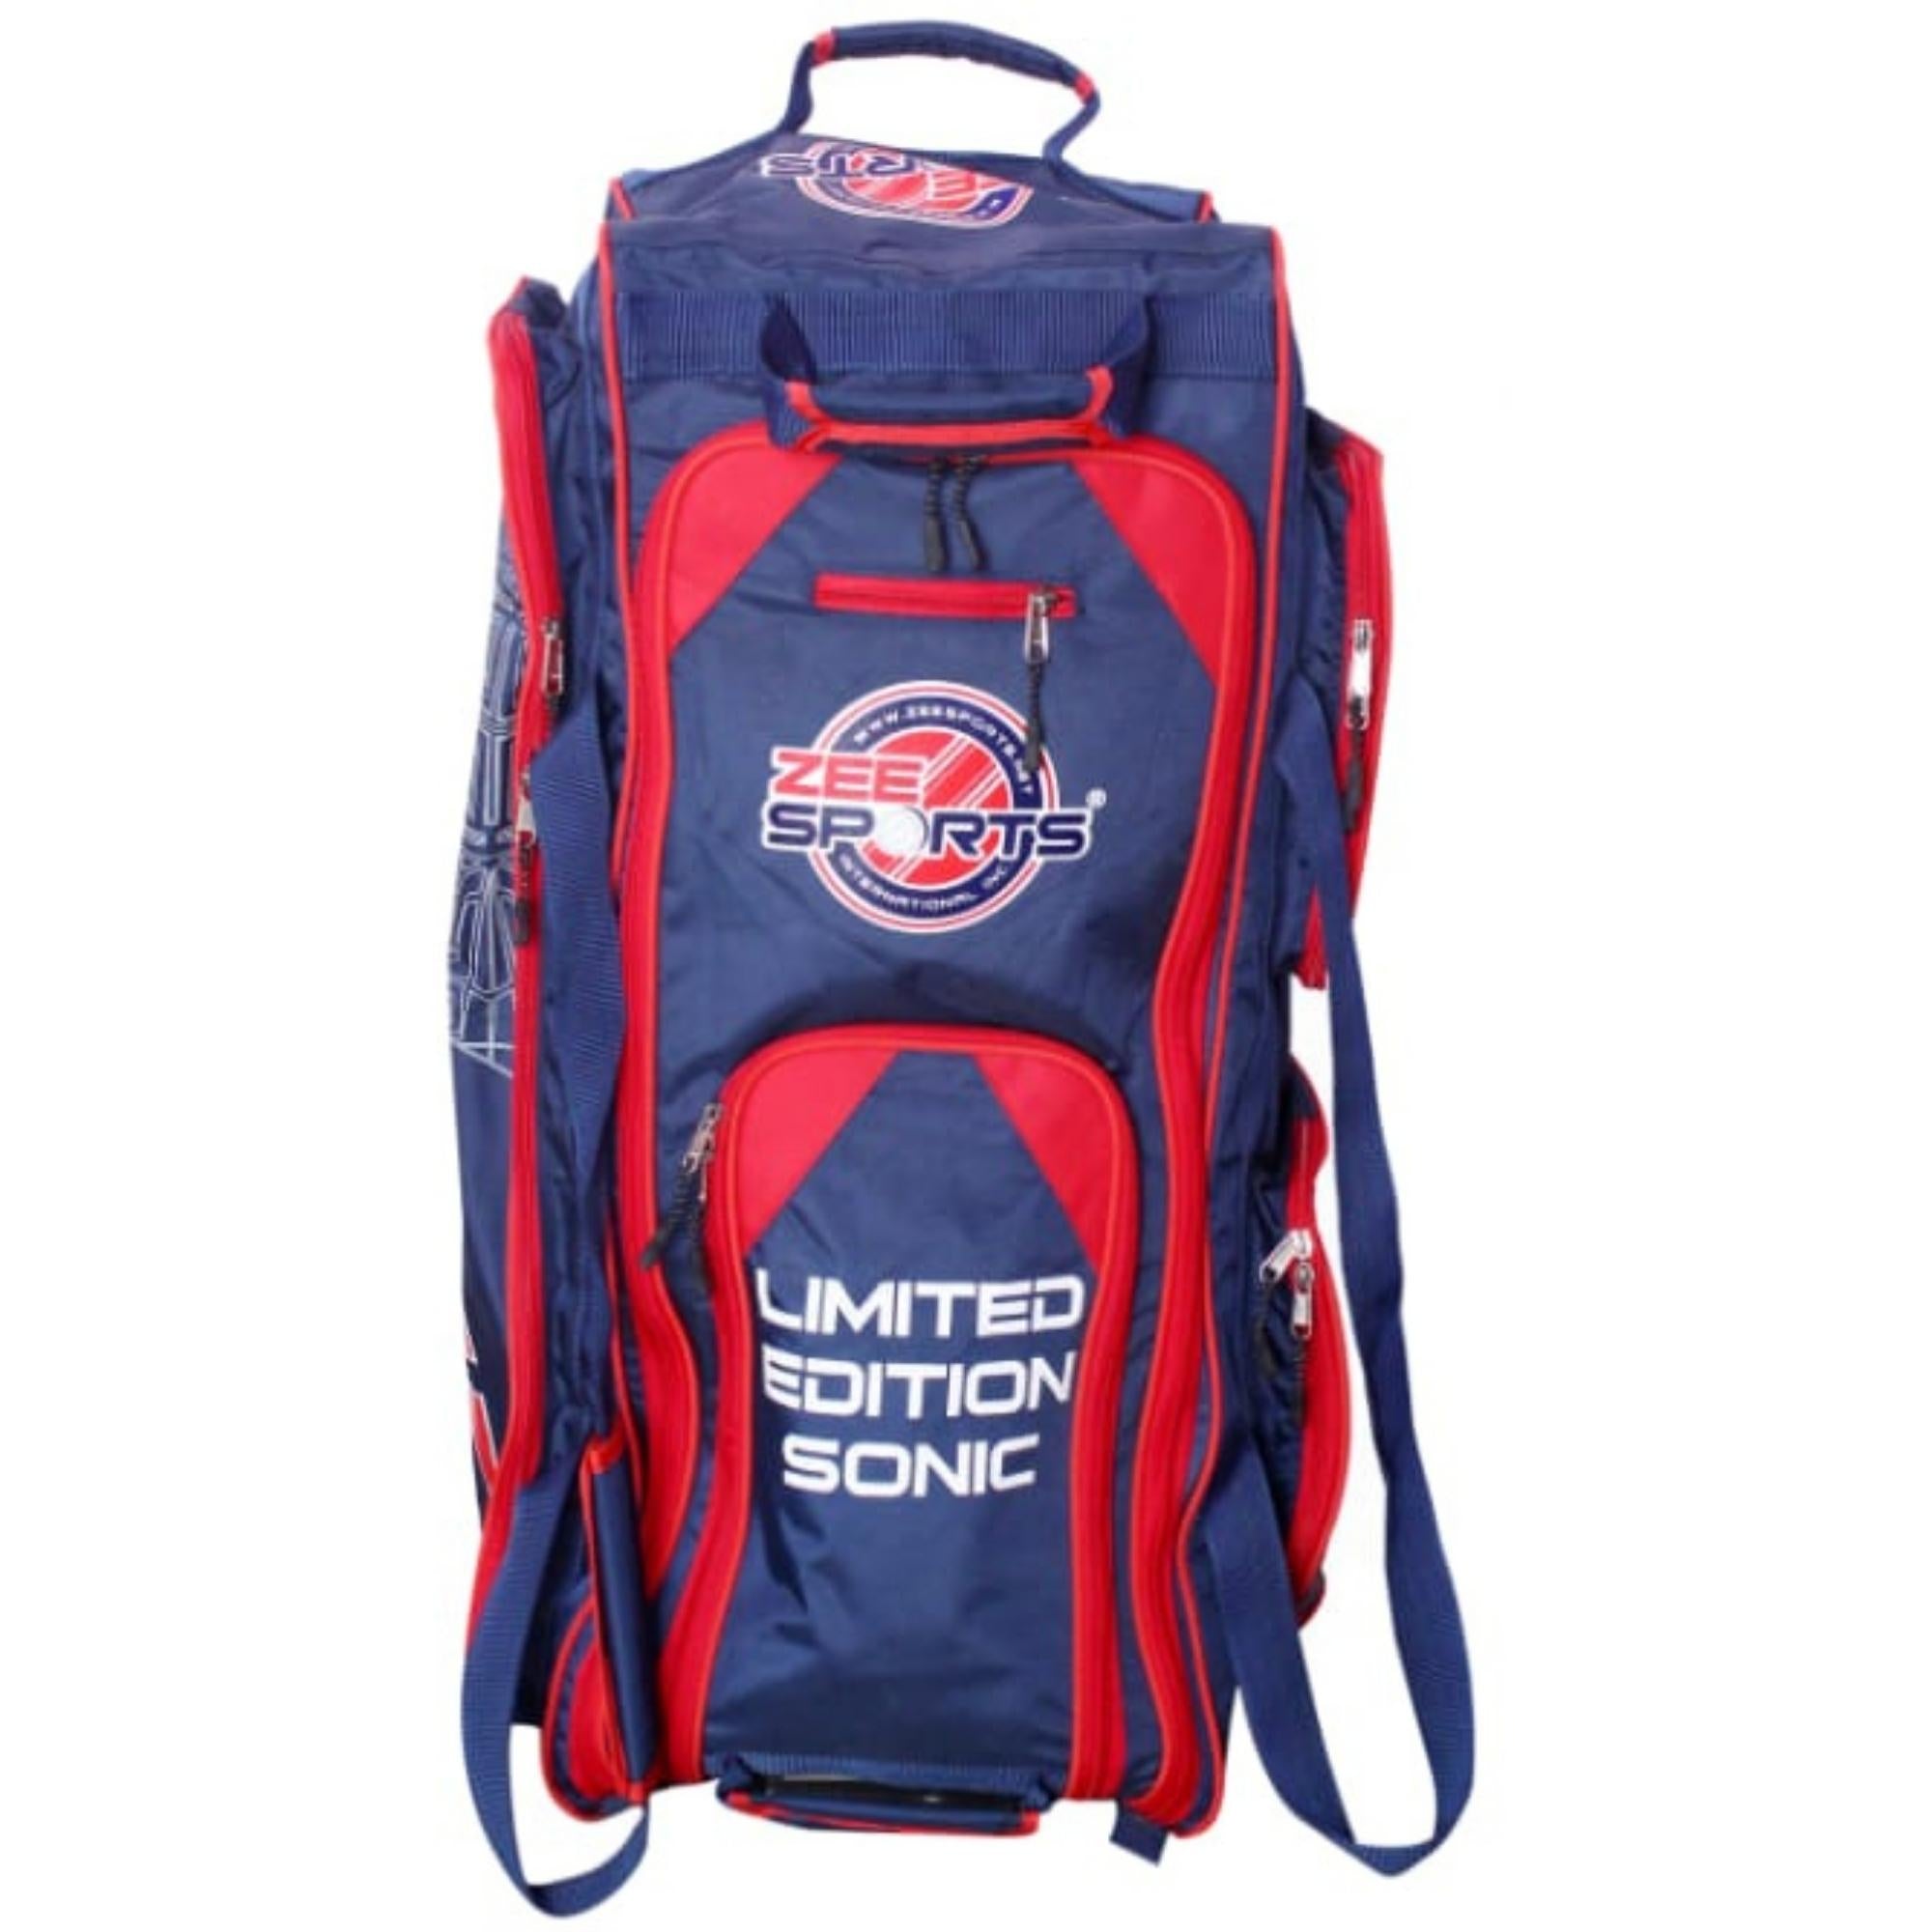 Zee Sports Cricket Kit Bag Limited Edition Sonic